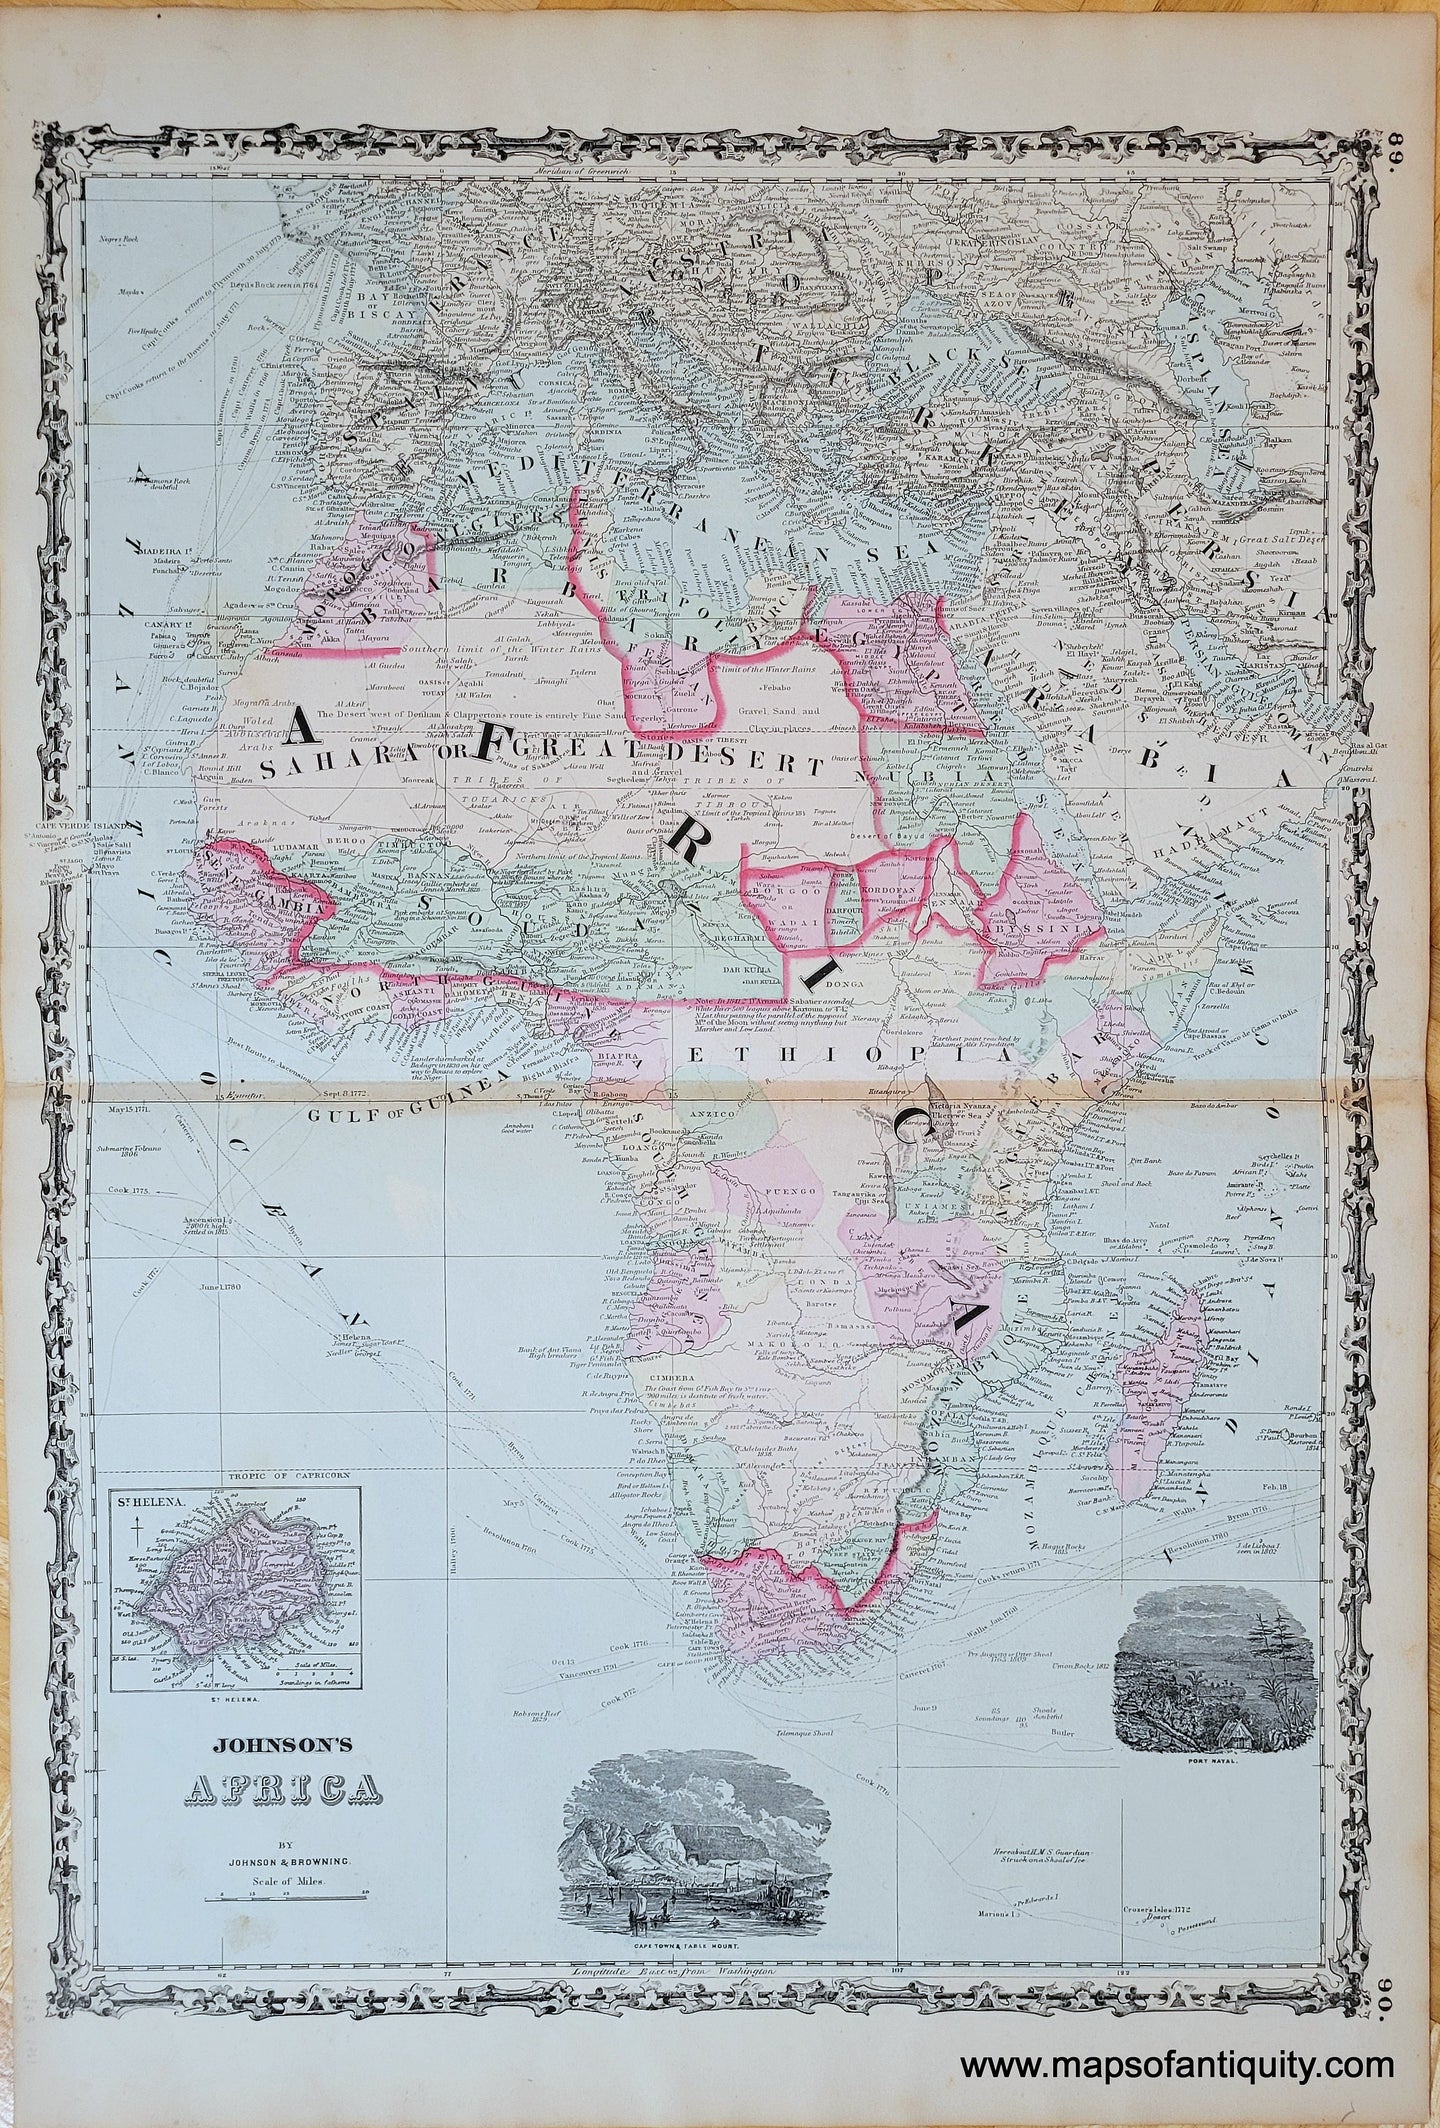 Genuine-Antique-Map-Johnsons-Africa-Africa-1861-Johnson-Browning-Maps-Of-Antiquity-1800s-19th-century